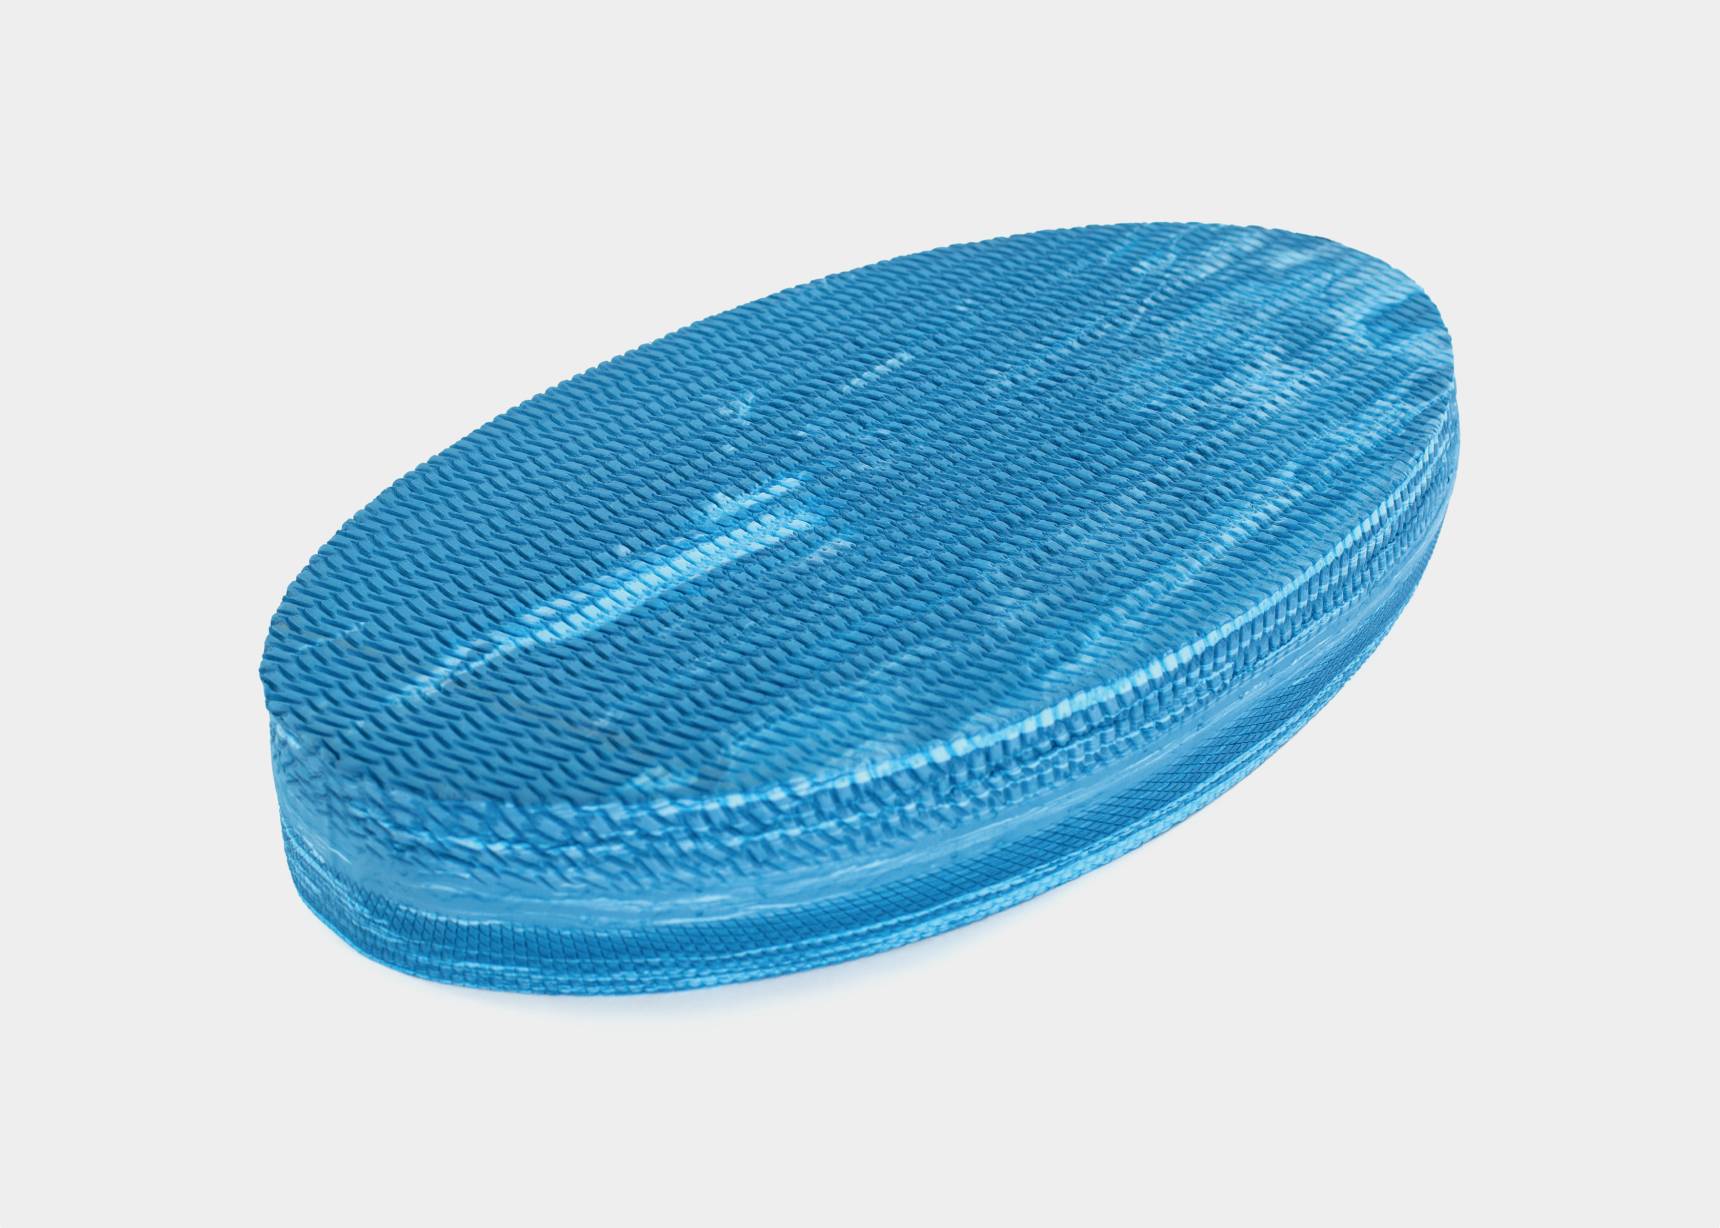 Blue large oval cushion for Pilates.